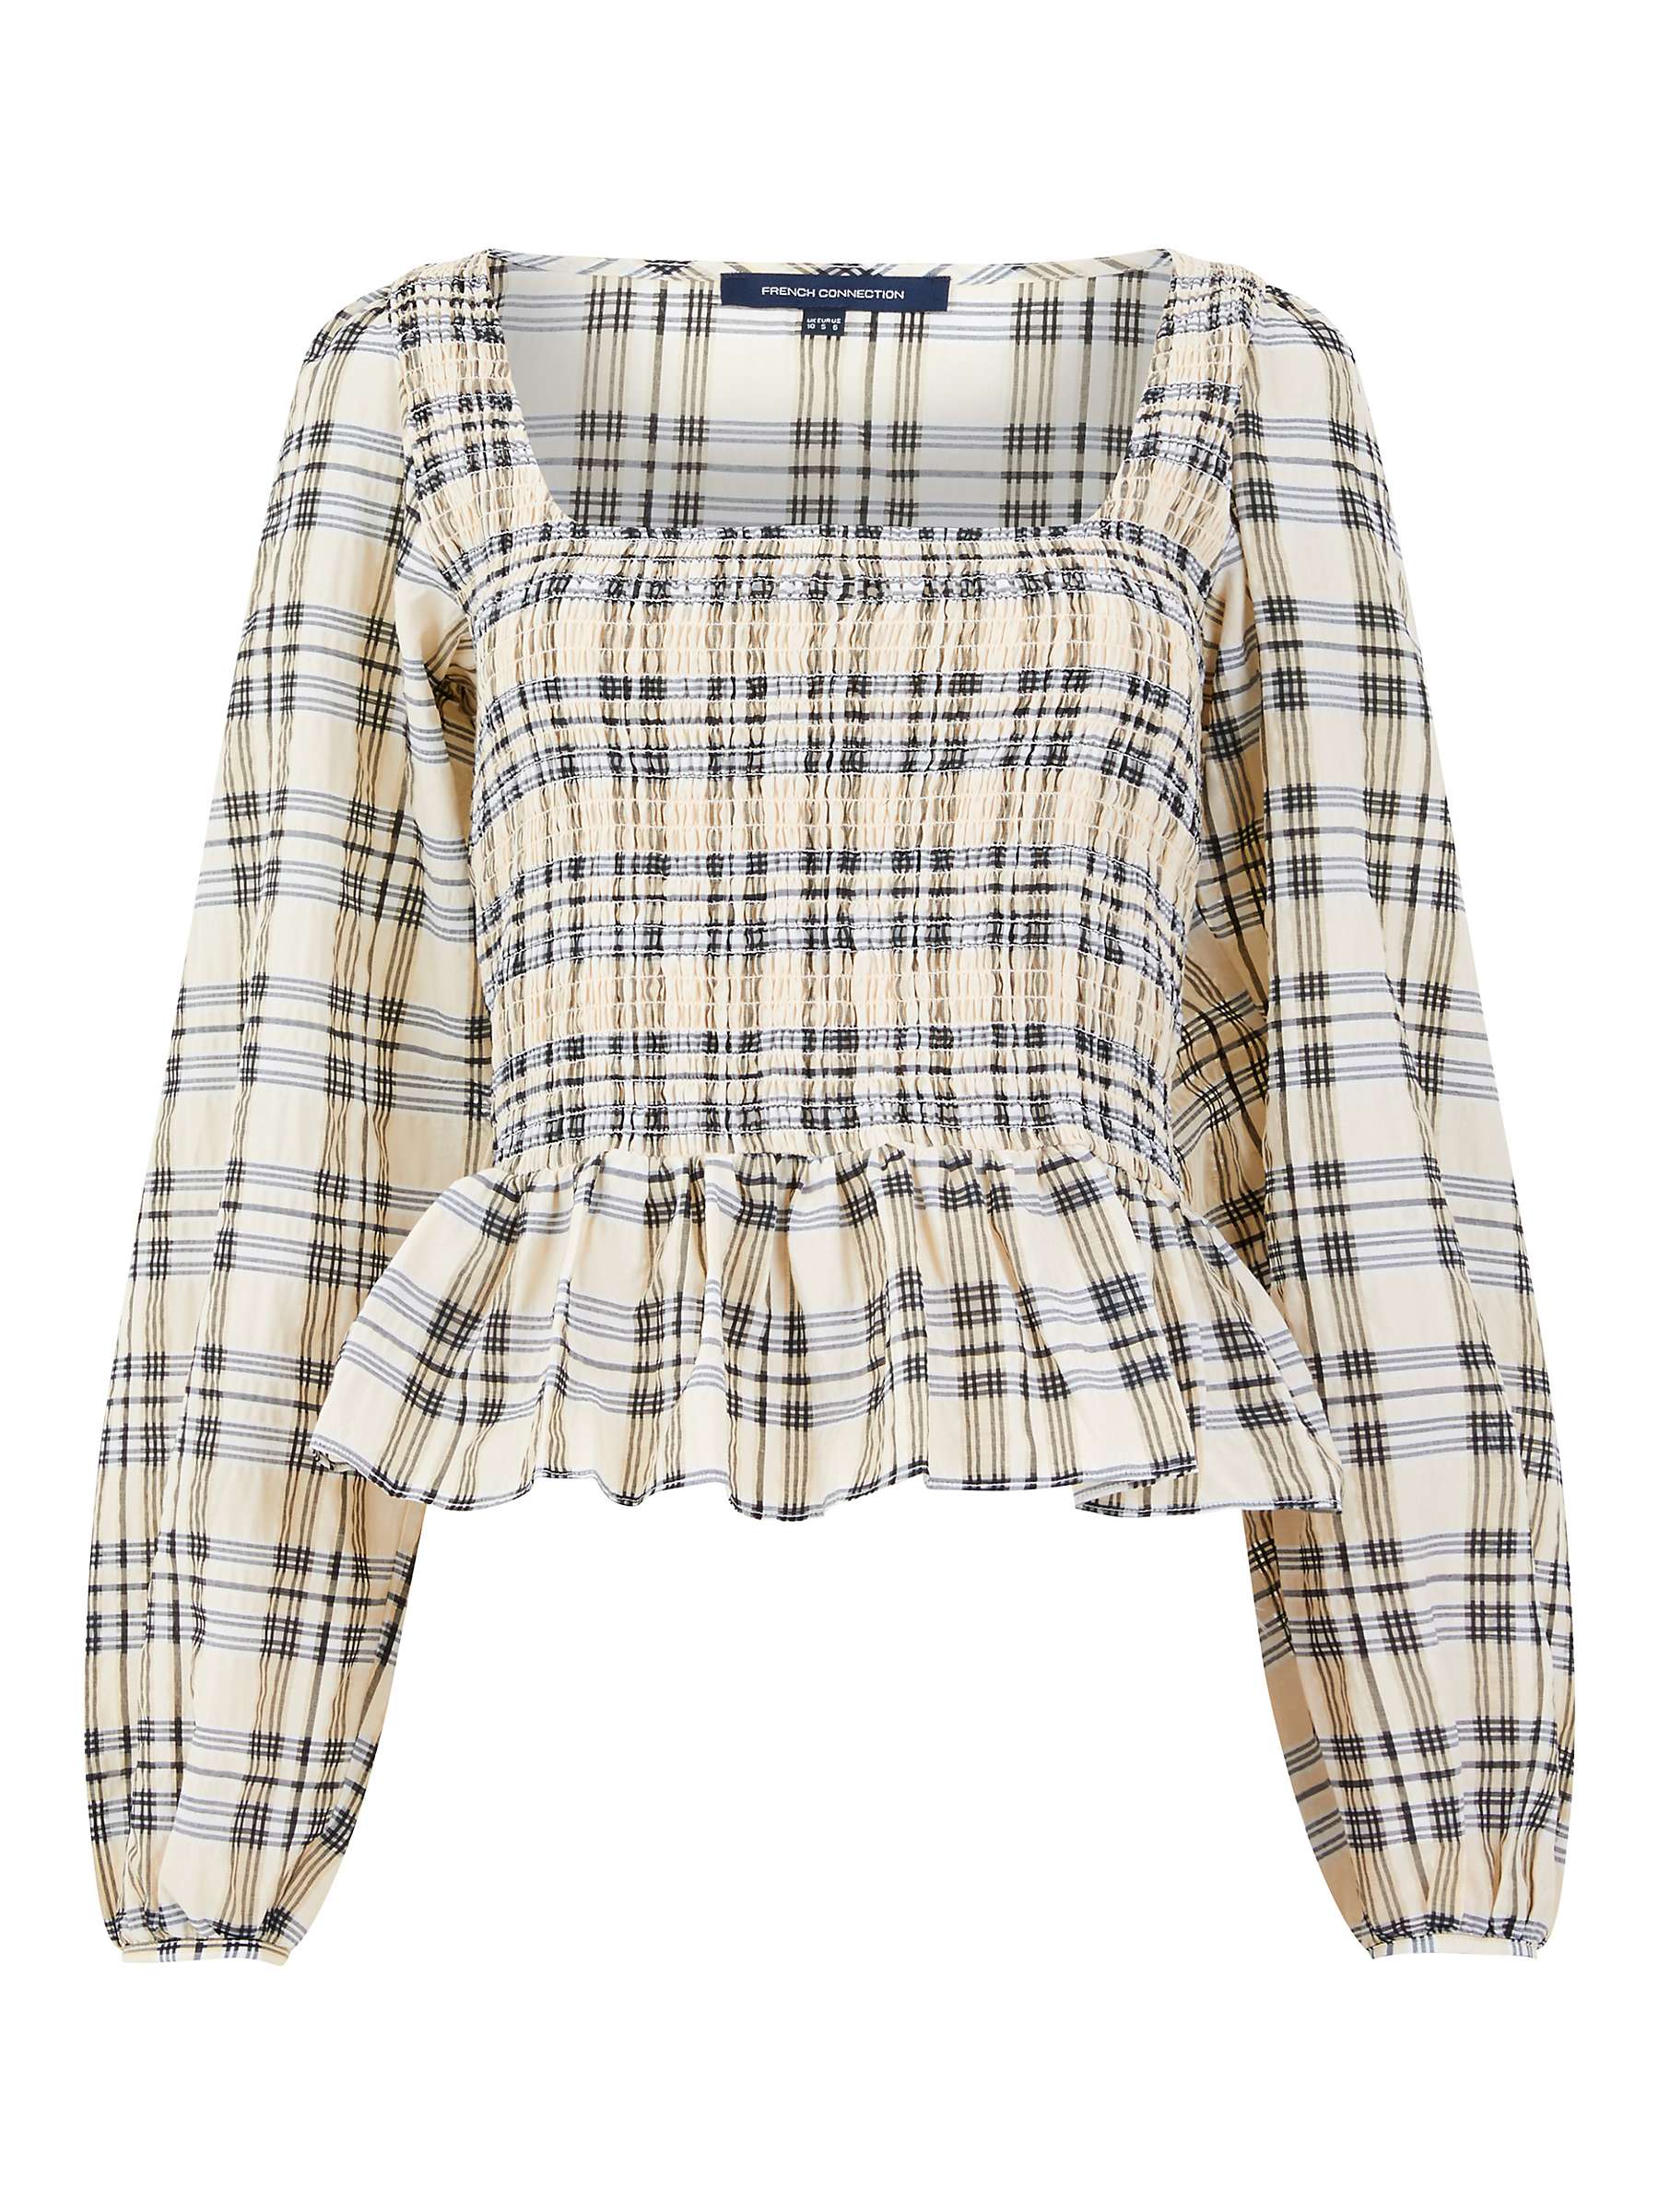 Buy French Connection Ivy Check Smocked Top, Black Ash/Classic Cream Online at johnlewis.com